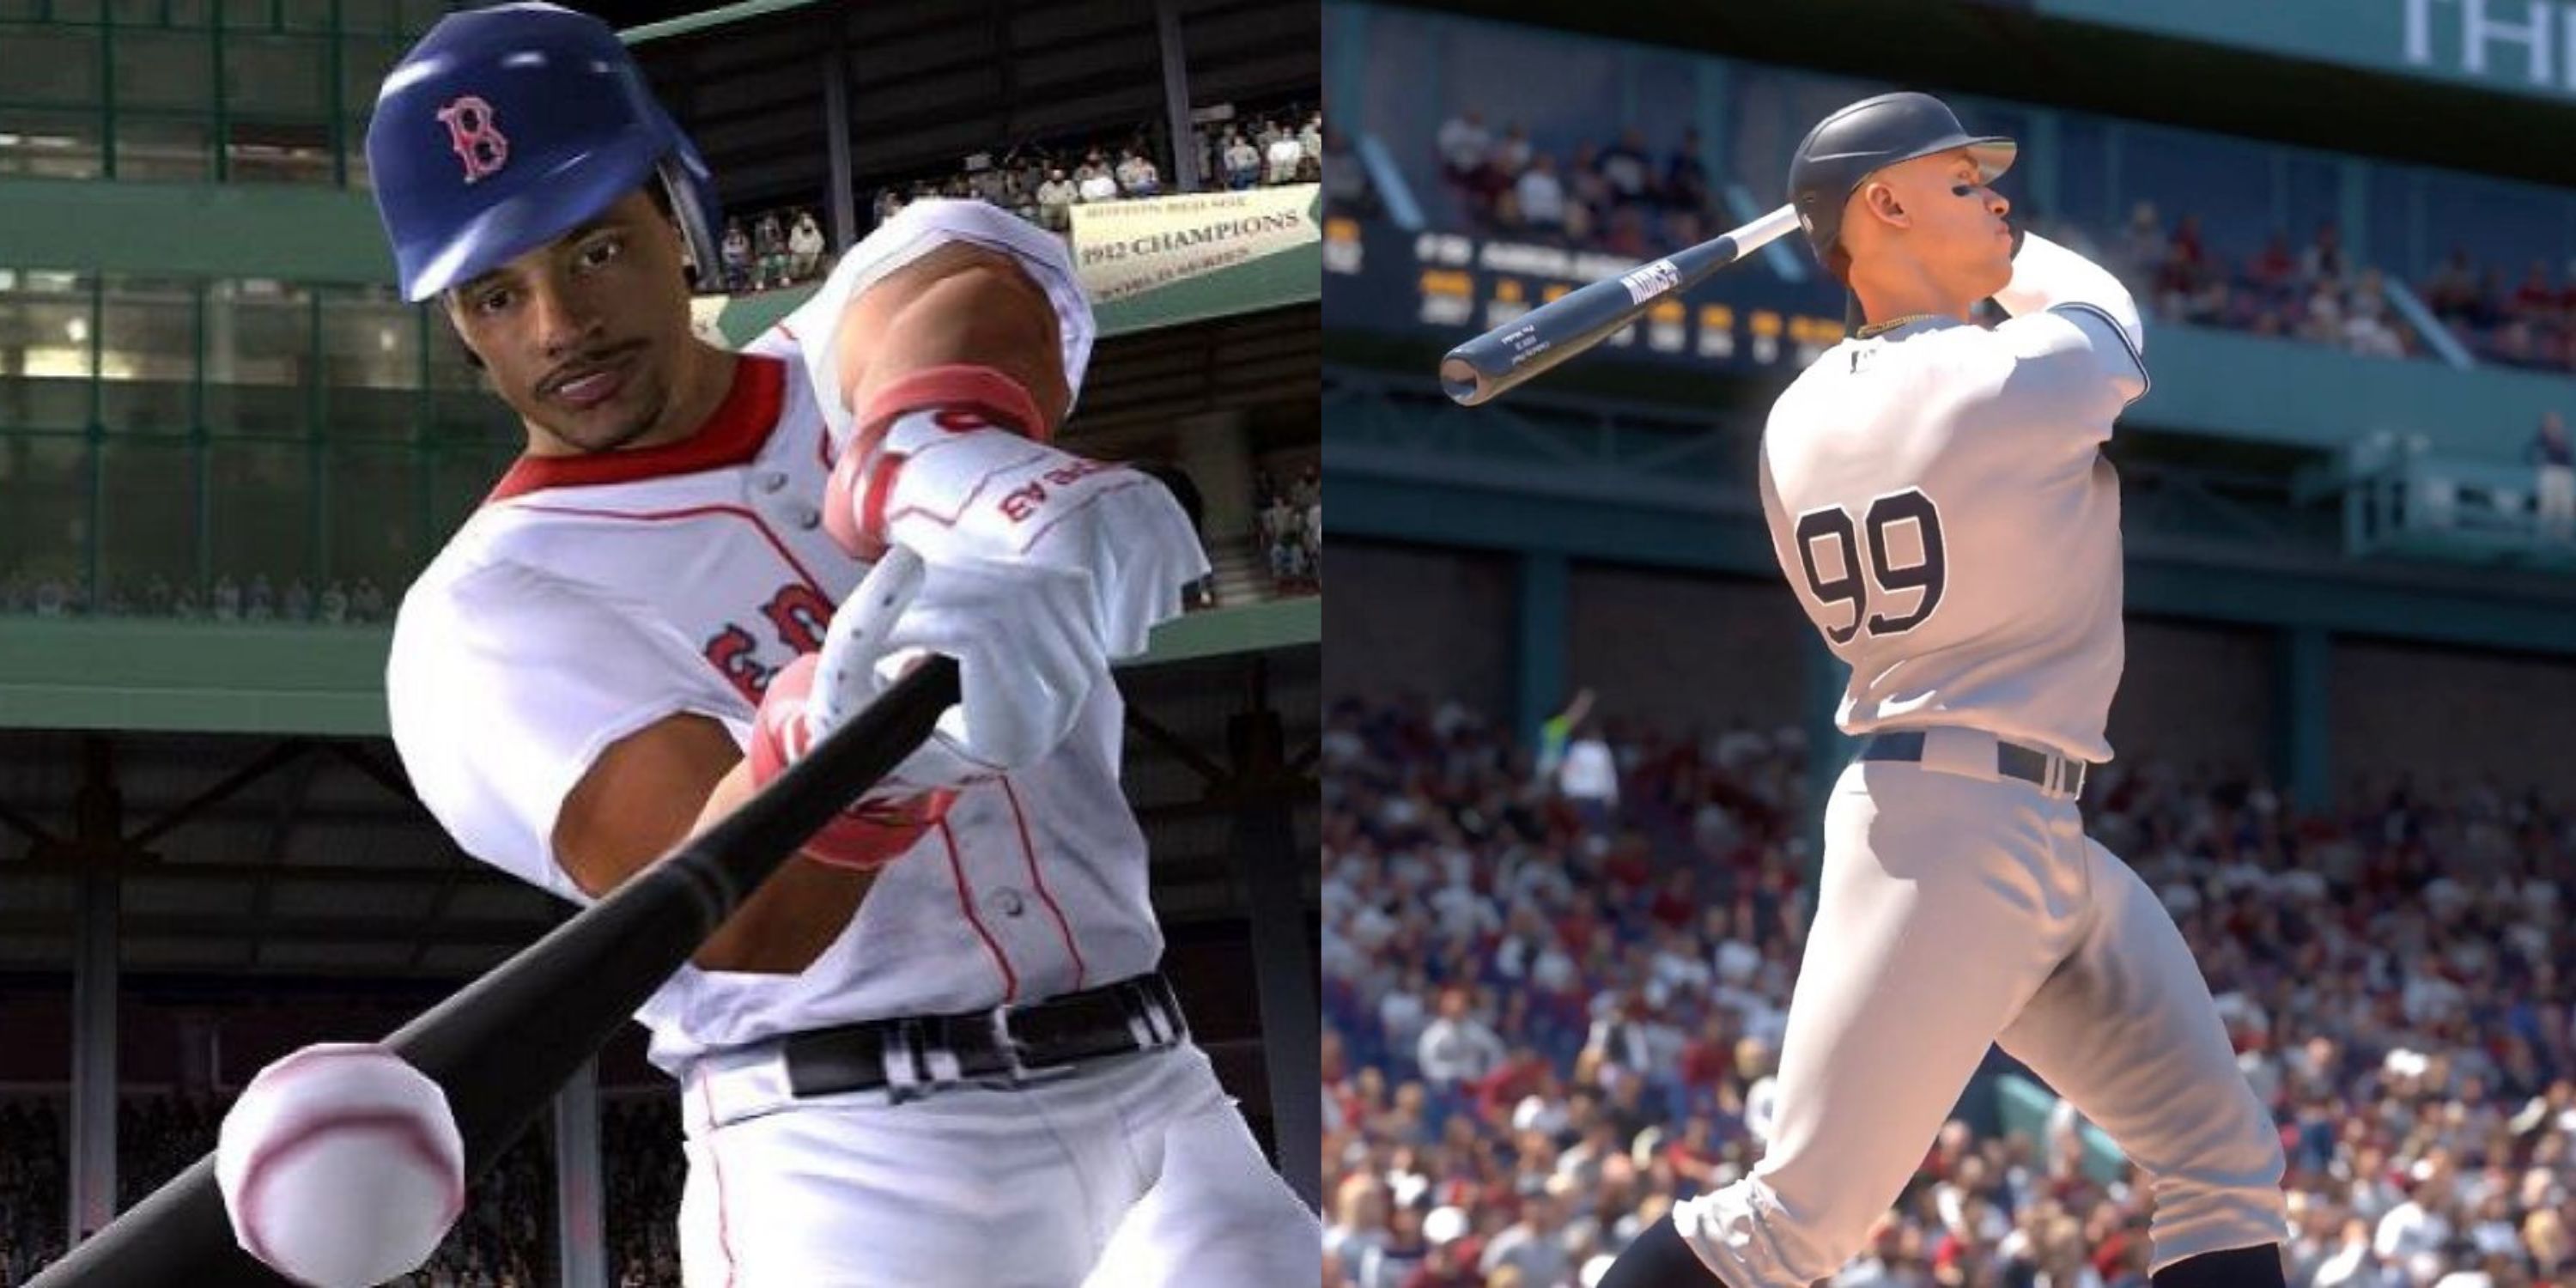 The 10 Best Baseball Video Games Ever According To Reddit